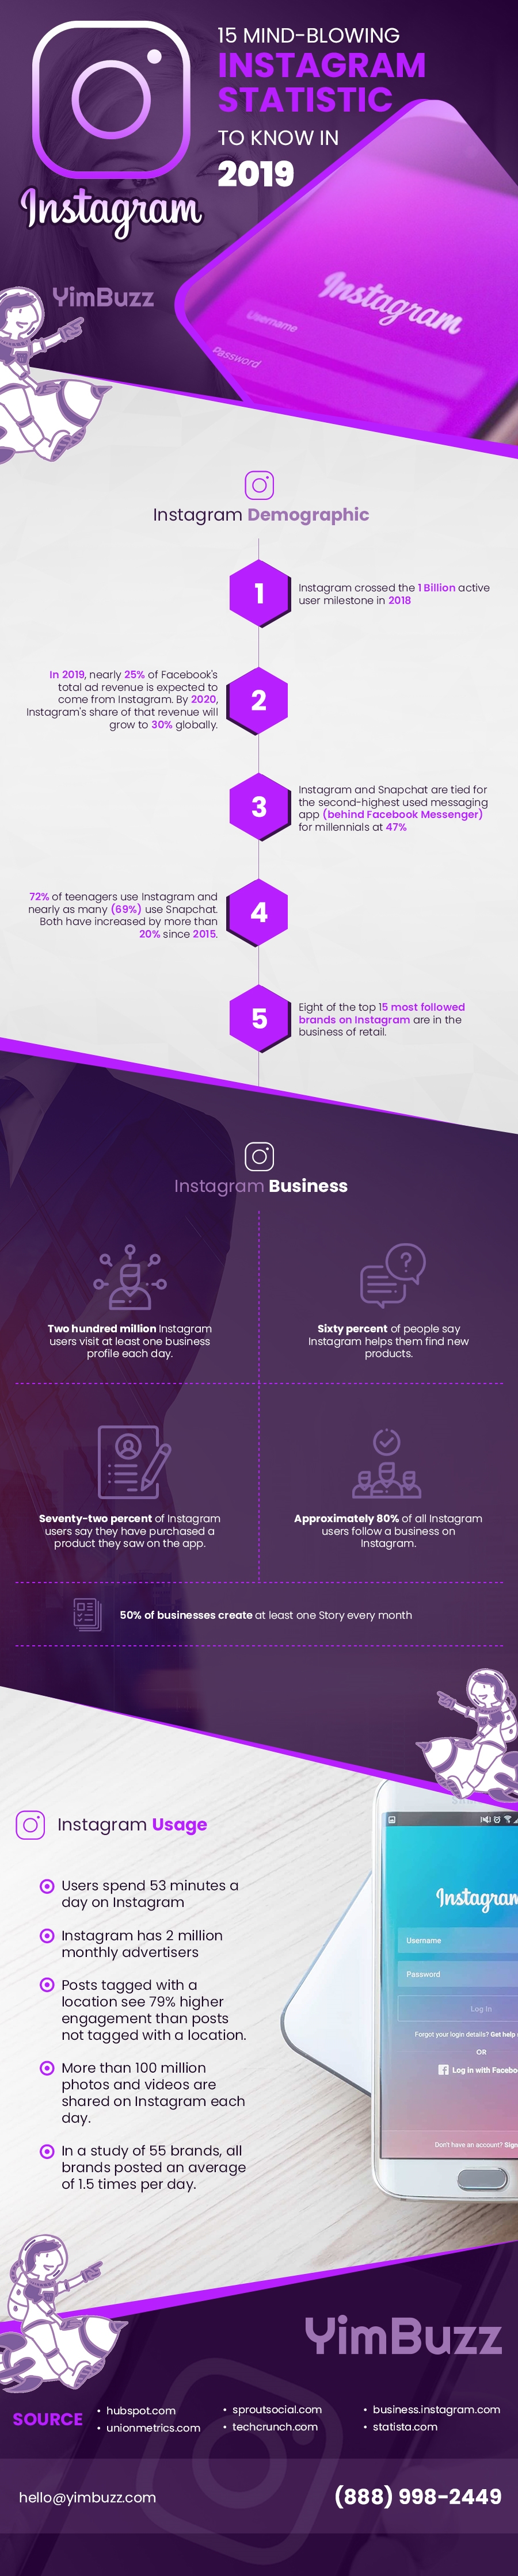 15 Interesting Instagram Stats For 2019 [Infographic]